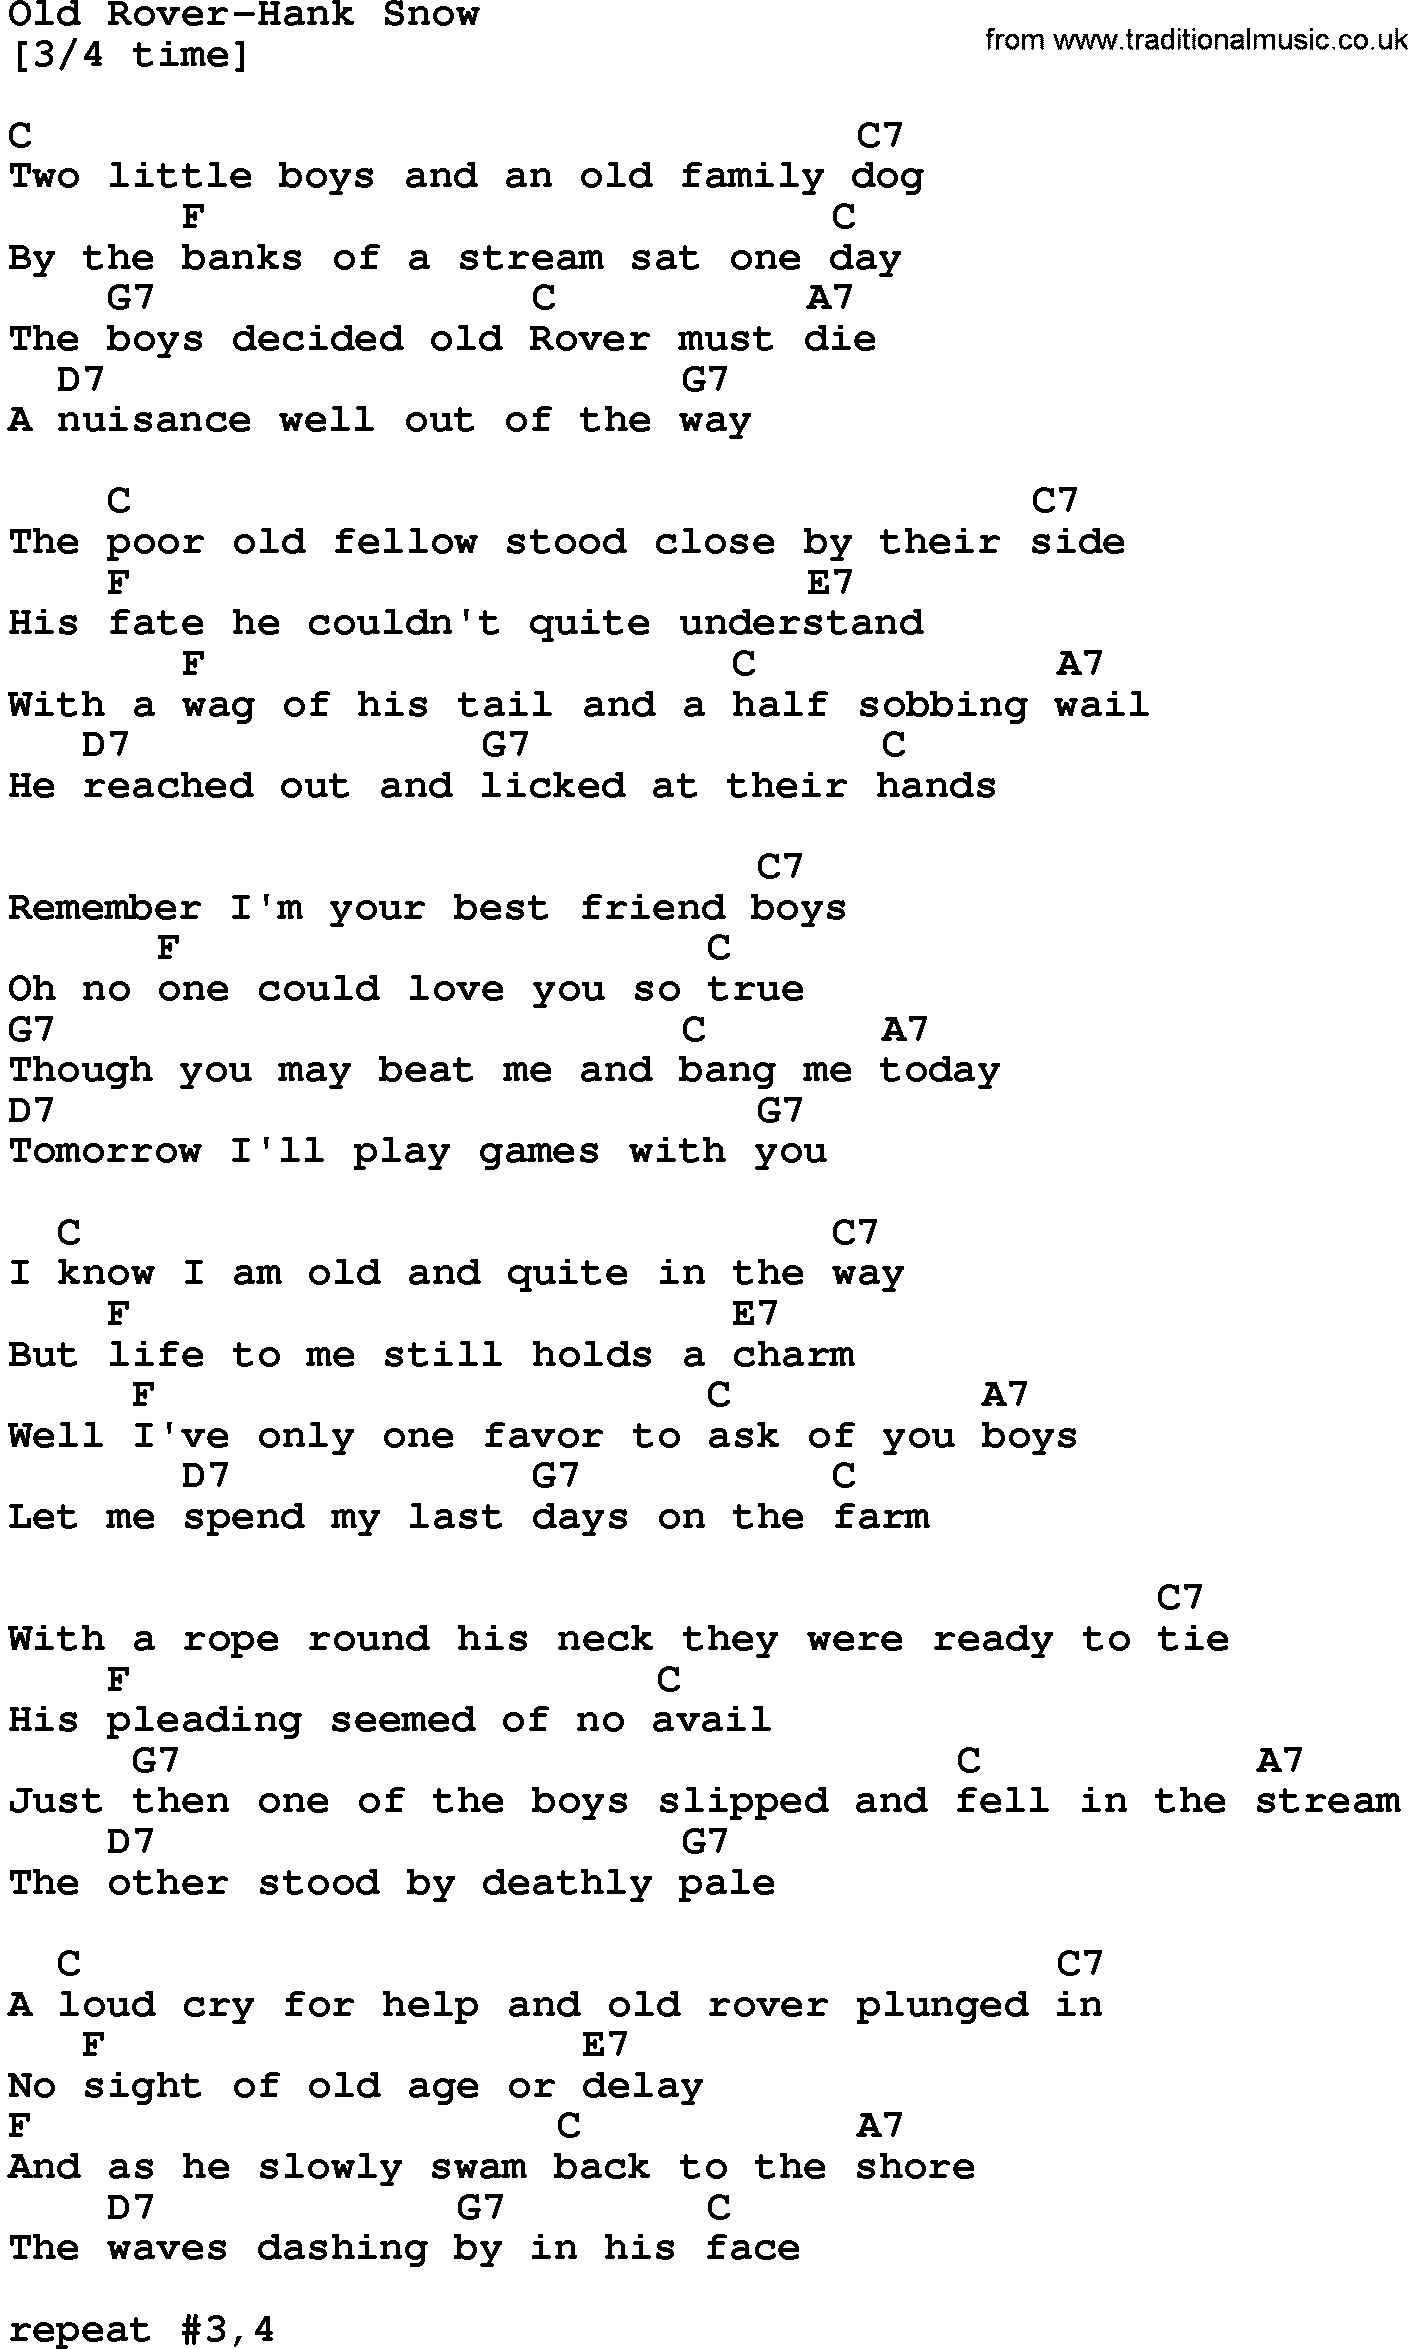 Country music song: Old Rover-Hank Snow lyrics and chords